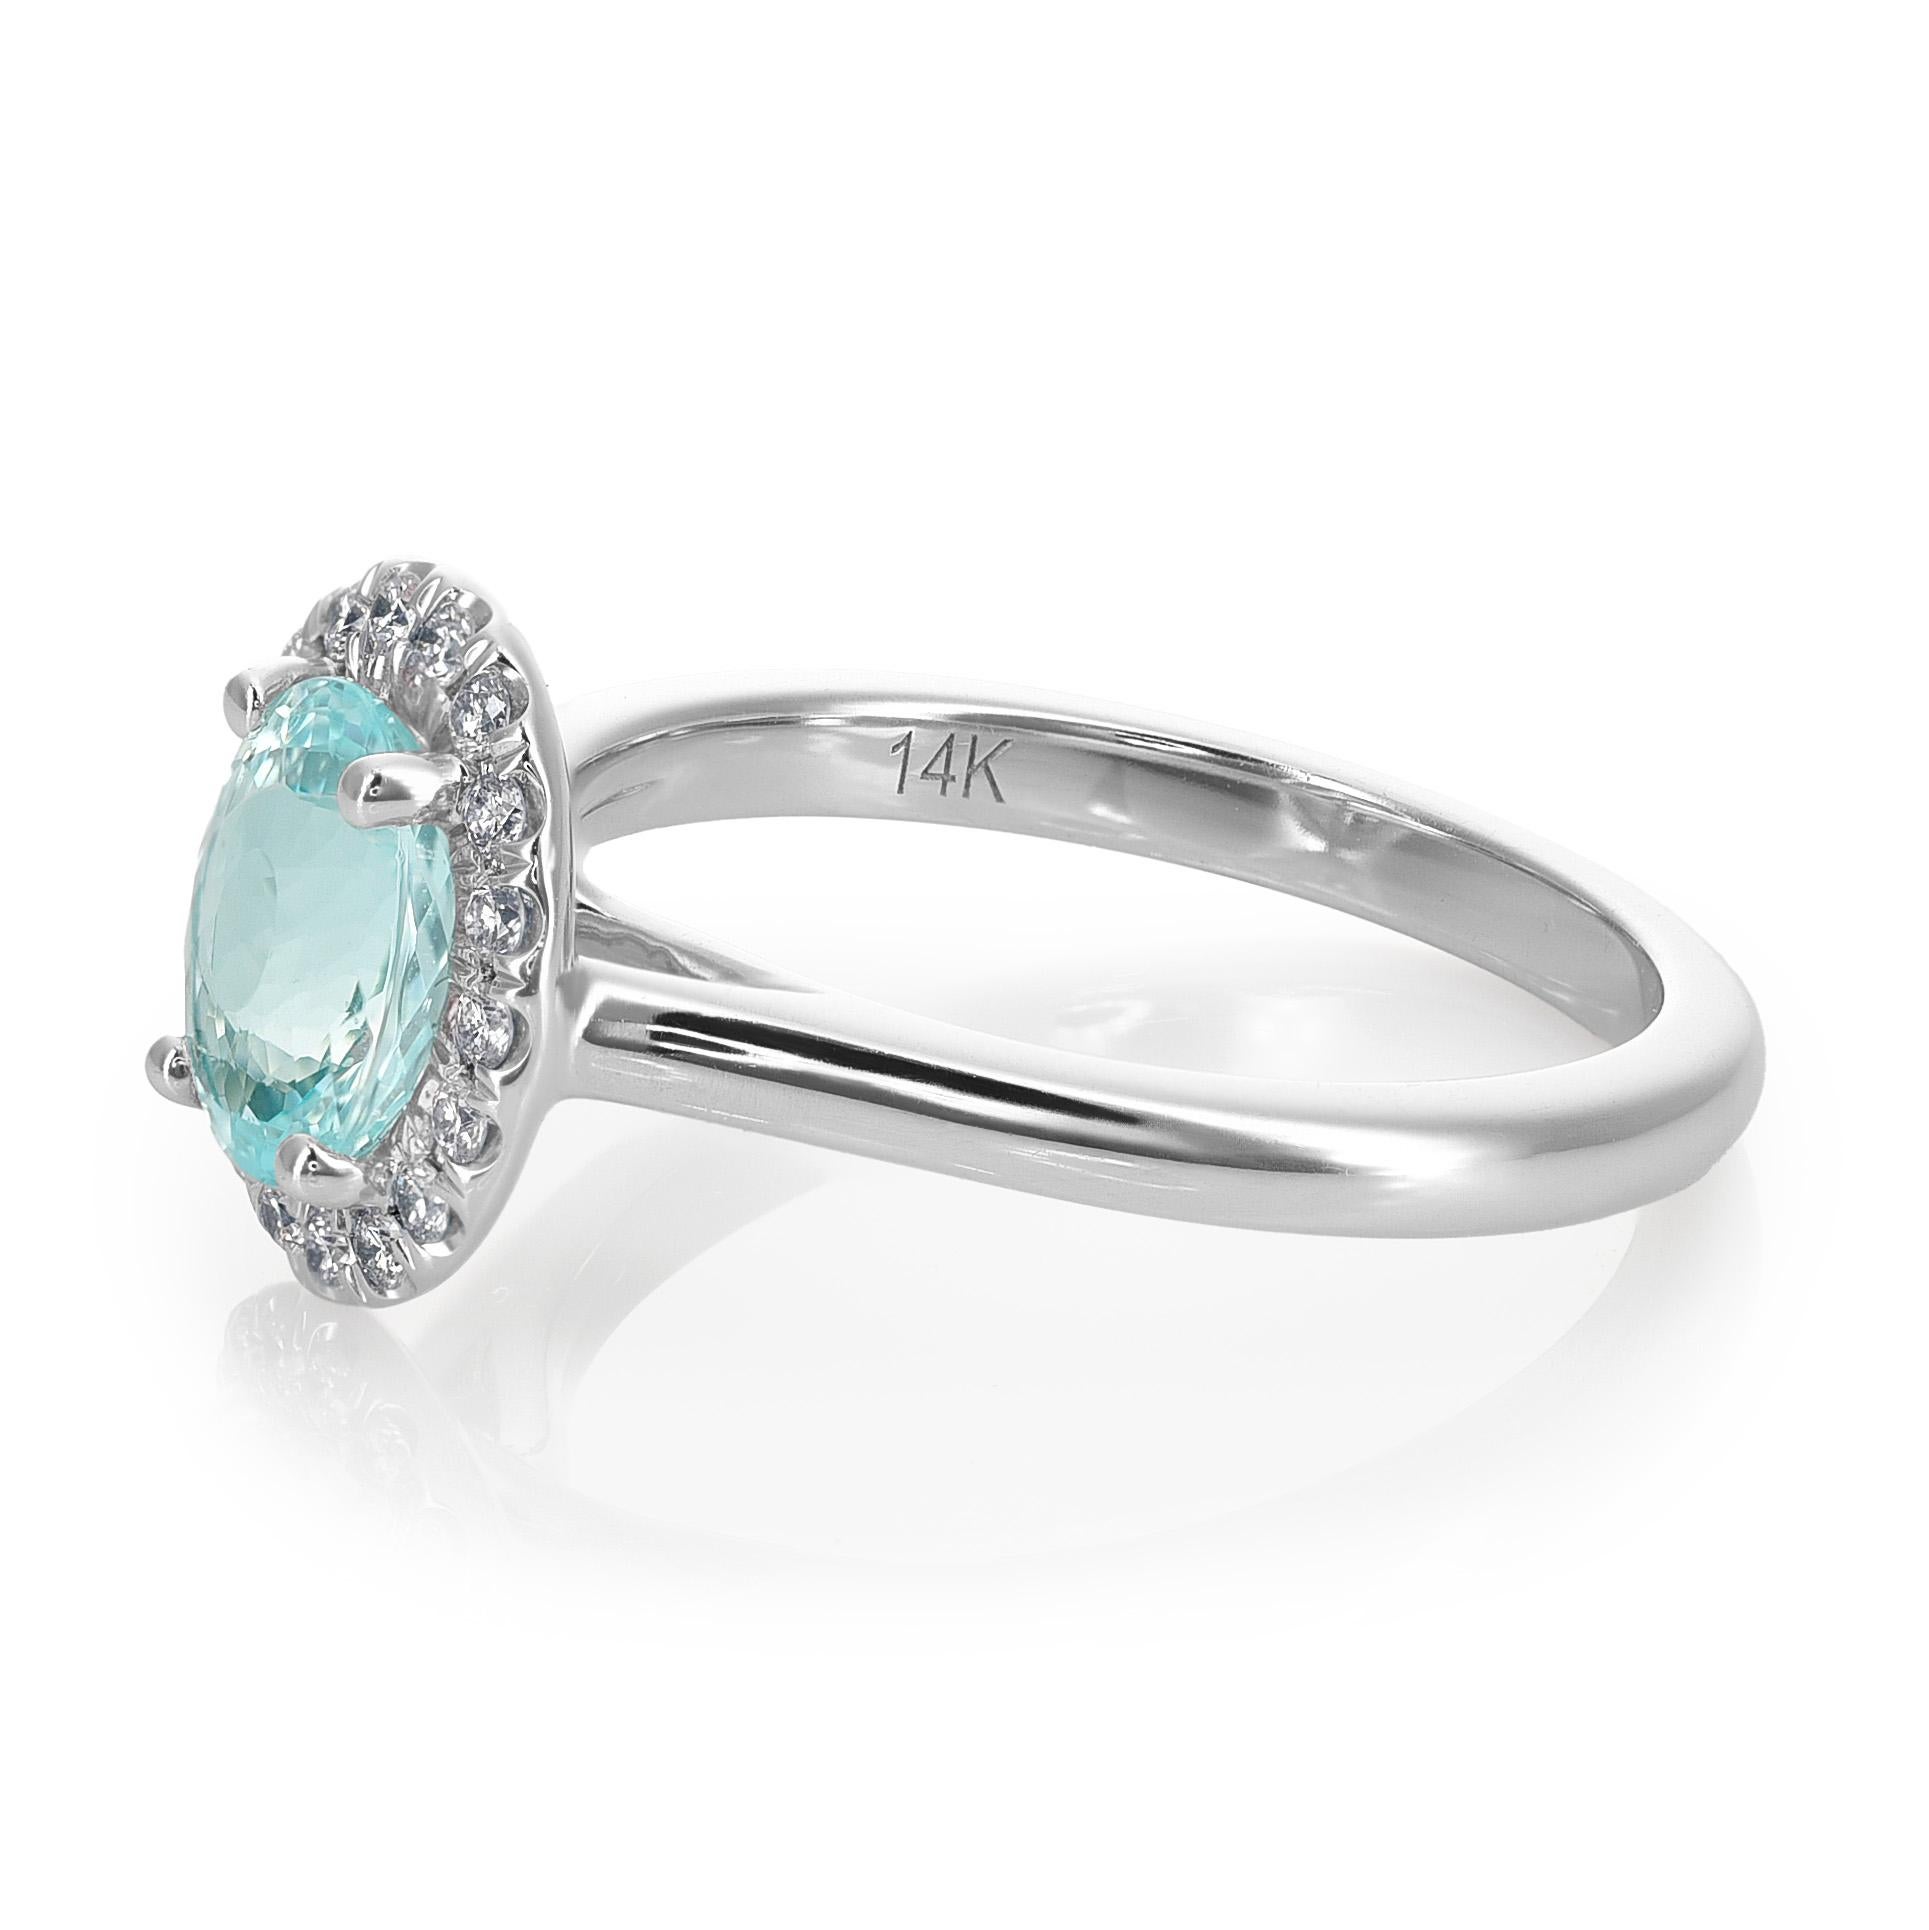 Immerse yourself in luxury with this 14K White Gold Ring featuring 1.29 carats Natural Paraiba Tourmaline in an enchanting oval shape. The captivating blue-green tones of the Paraiba Tourmaline are enhanced through a meticulous heating process,